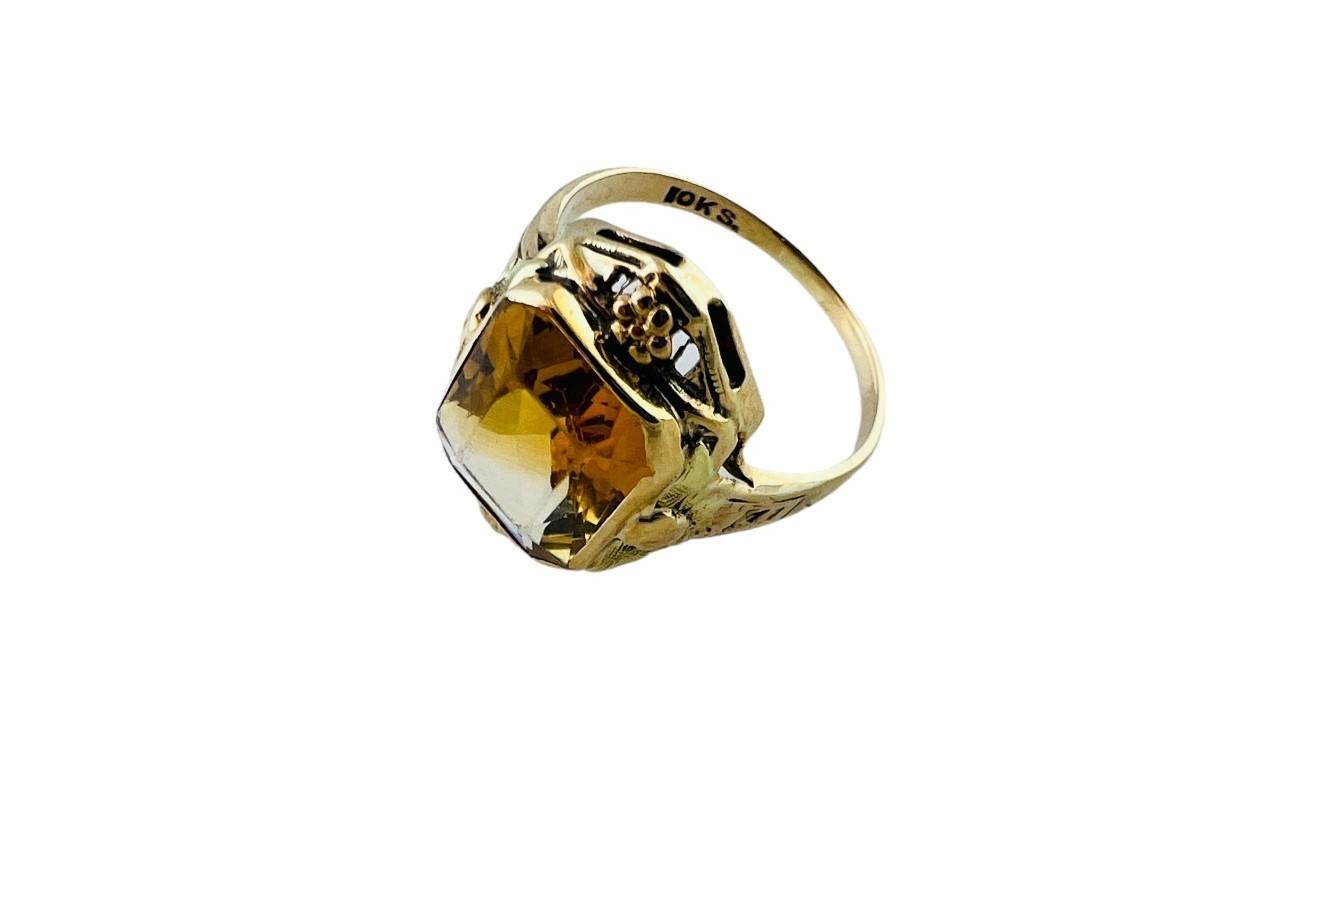 This beautiful yellow gold ring is set with a center faceted orange citrine stone. 

Filigree 10K yellow gold frame around stone is detailed with floral accents

Stampe 10K S

Shank is approx. 1.4mm

Front of ring measures approx. 17.1 x 11.9 x 5.1